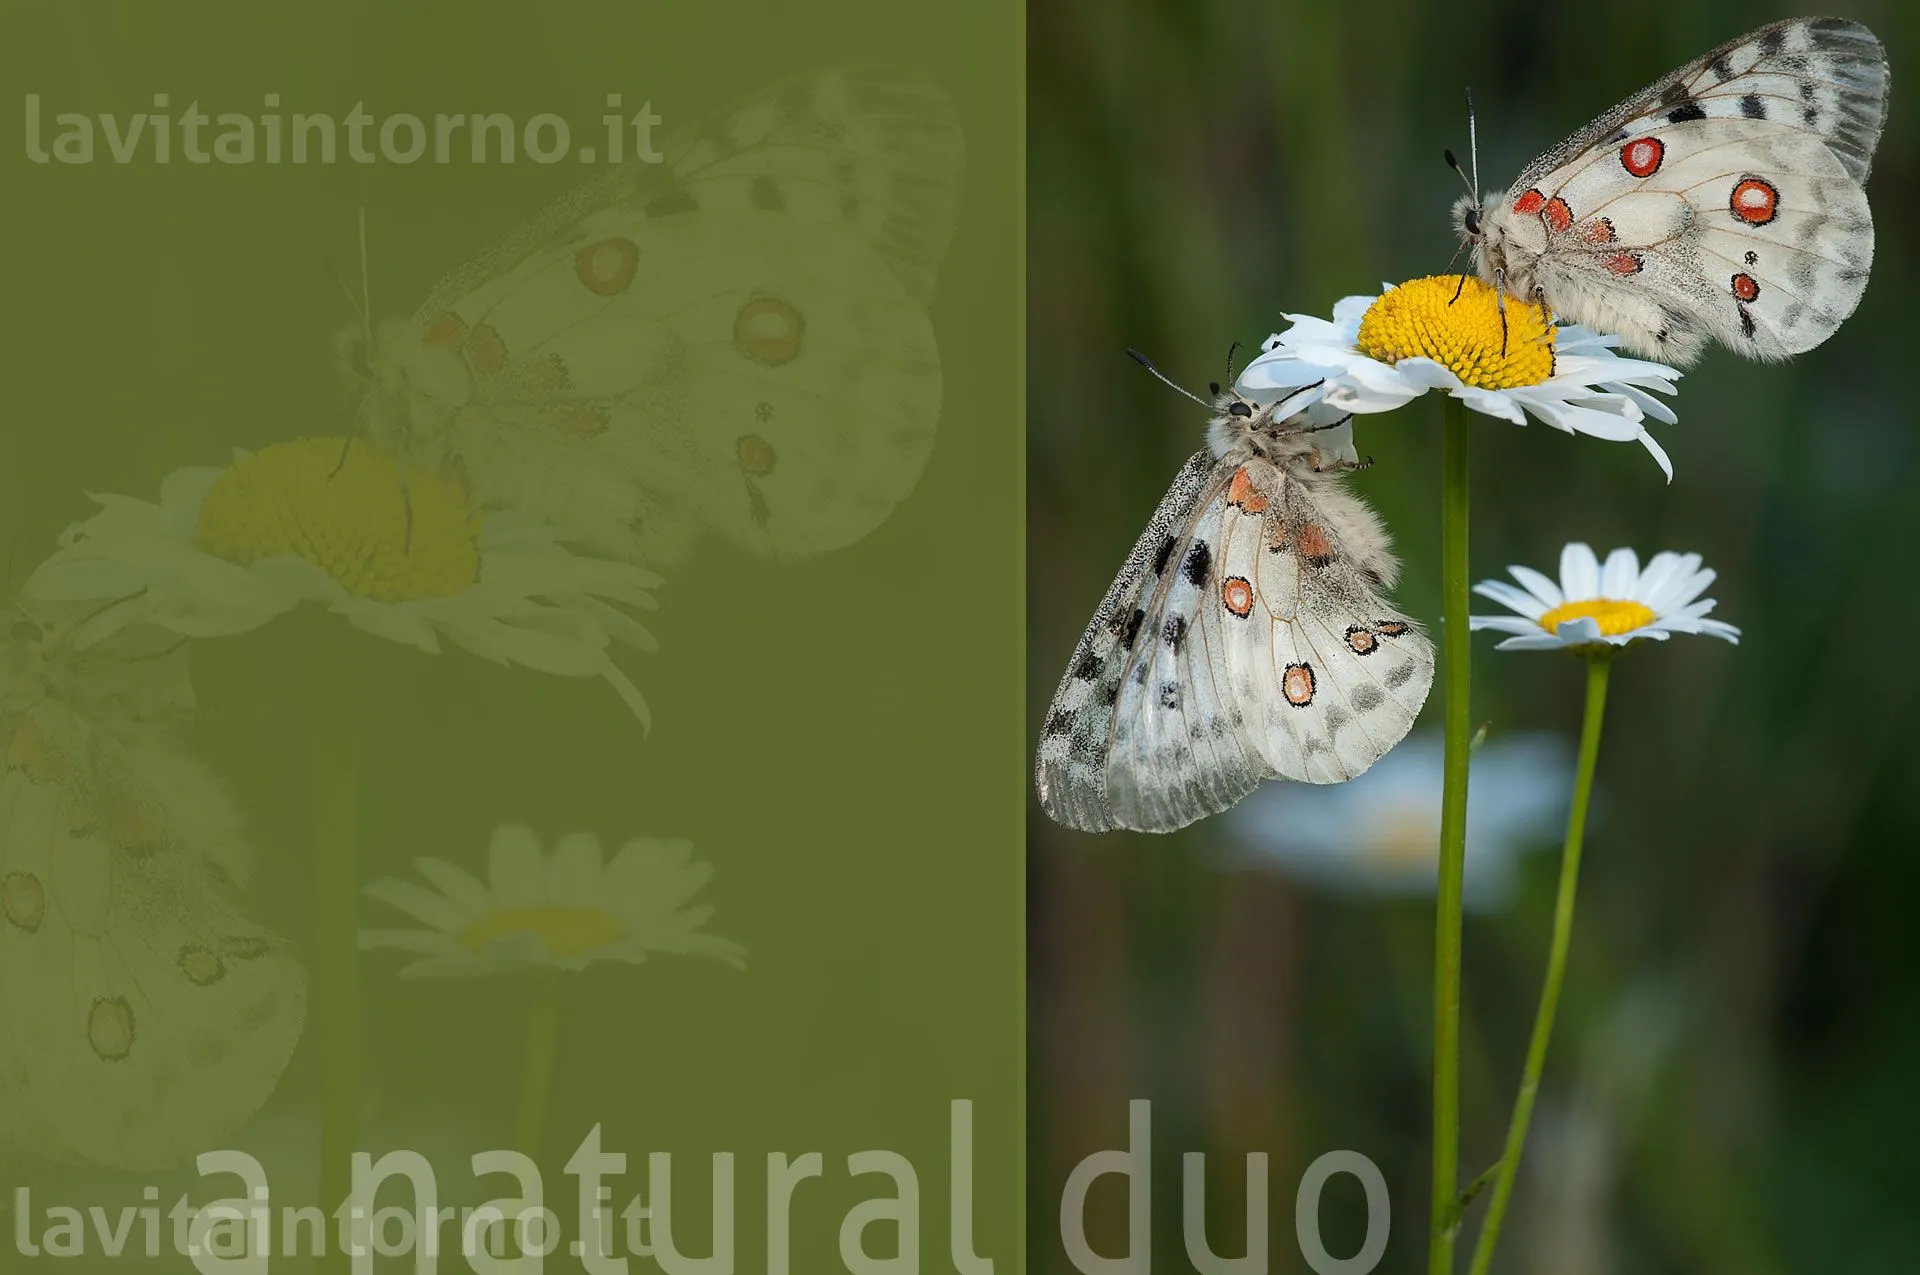 Parnassius apollo: a natural duo
D200
Nikkor 300 F/4 IF ED AF-S 